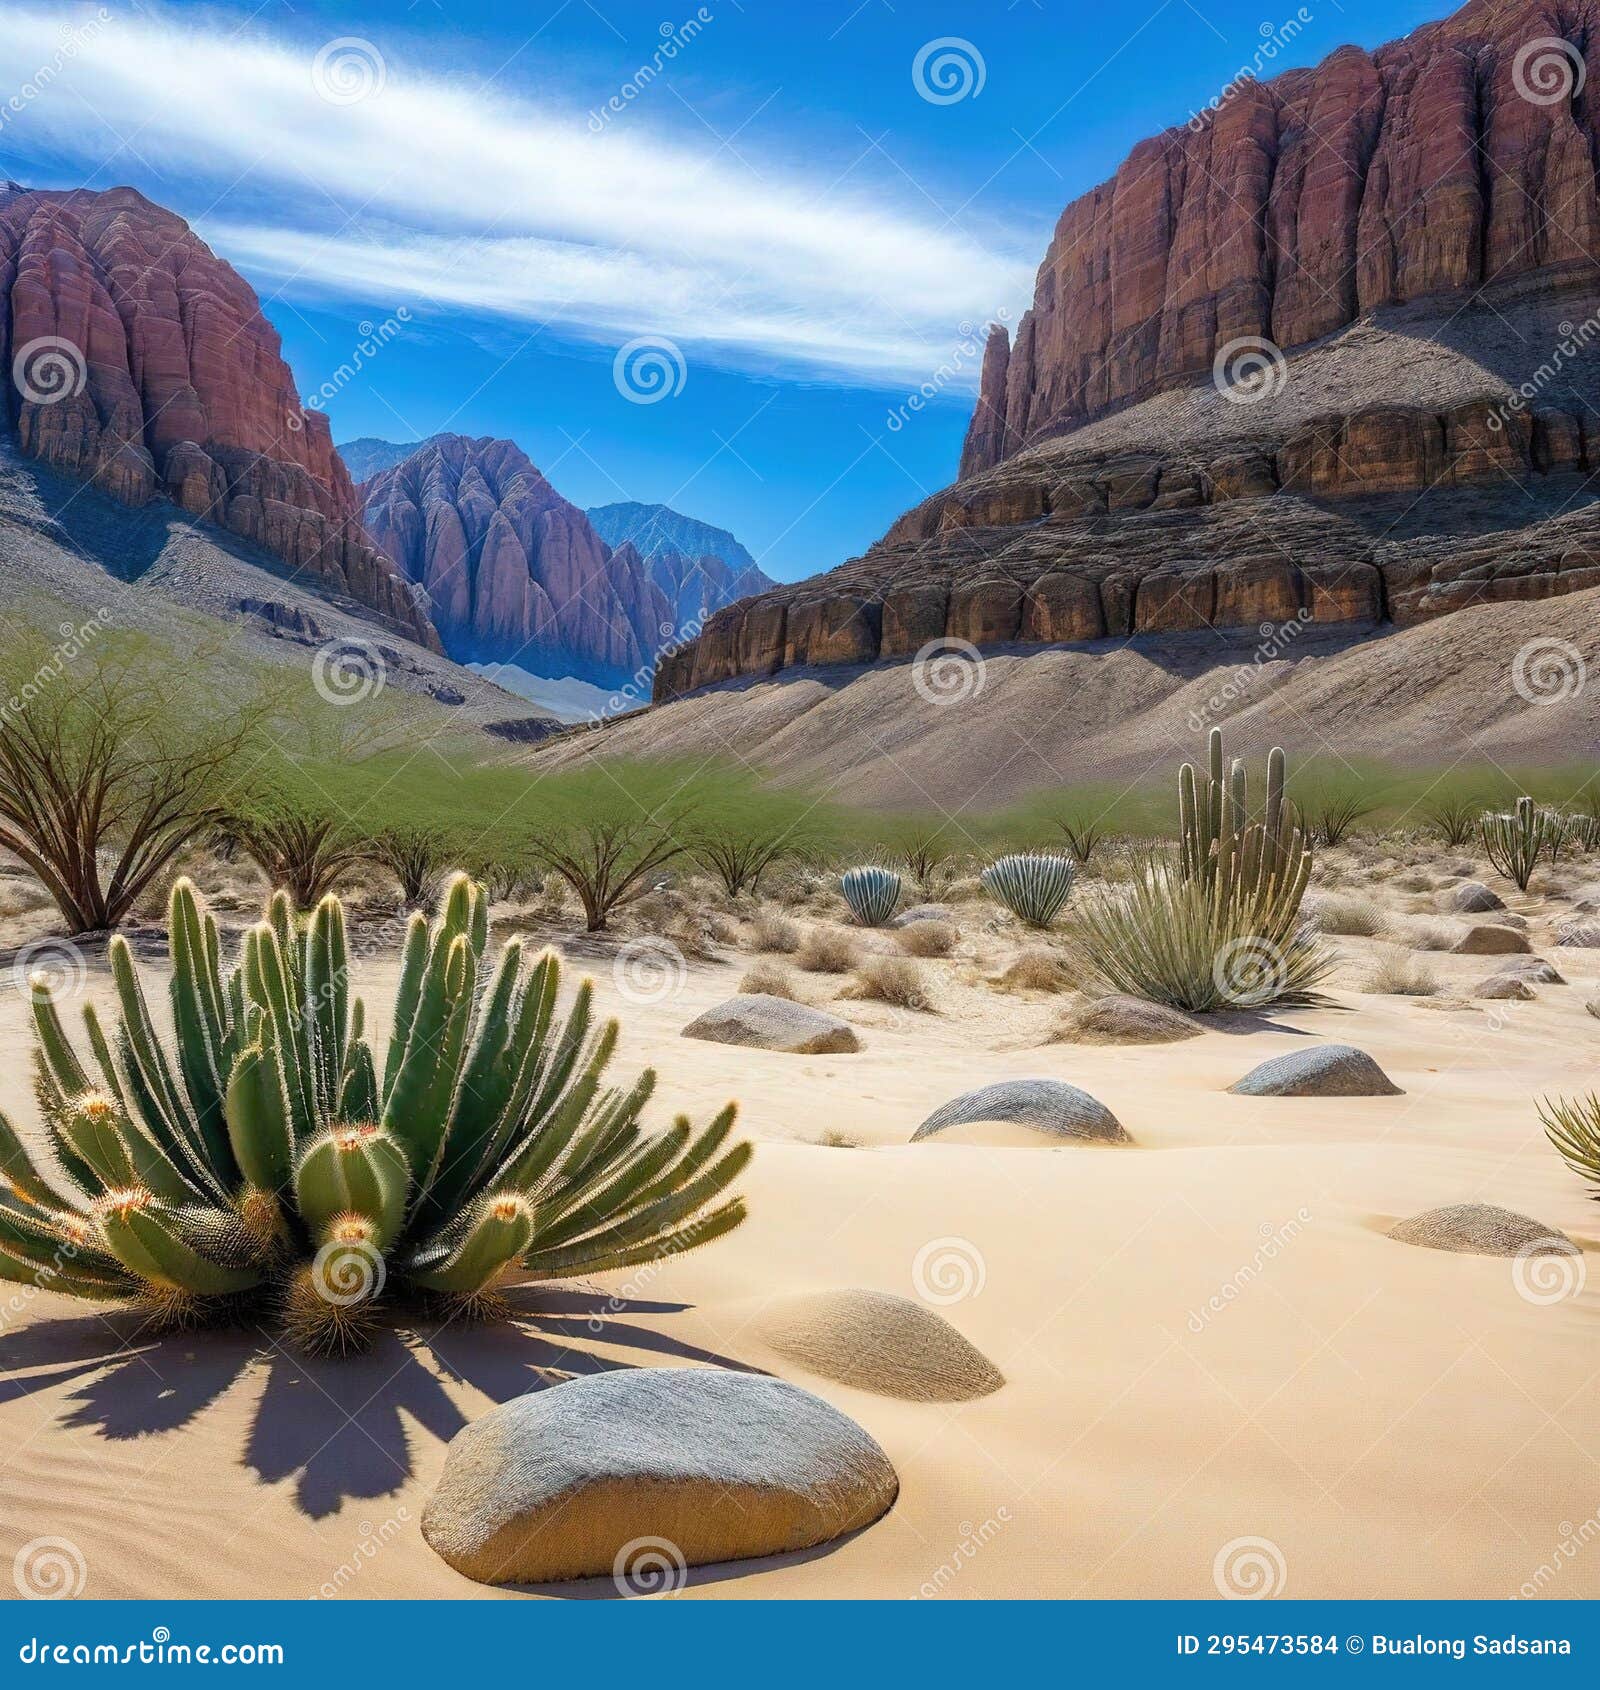 ai generated  wildlife concept of a desert landscape with rocks and cactus plants in the foreground and mountains in